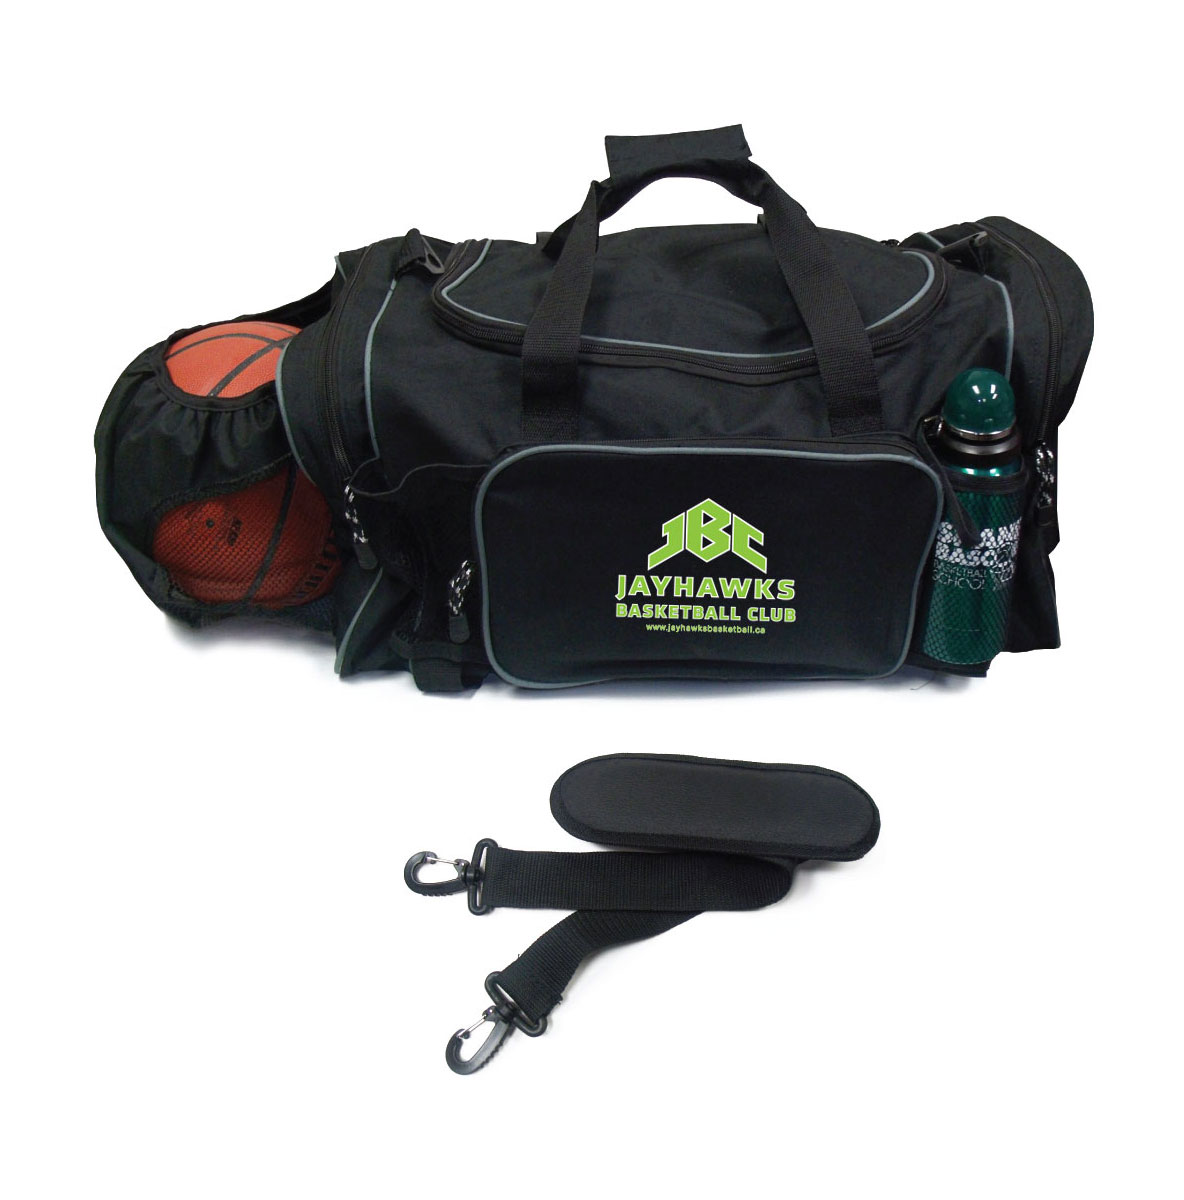 Deluxe Sports Duffle Bag